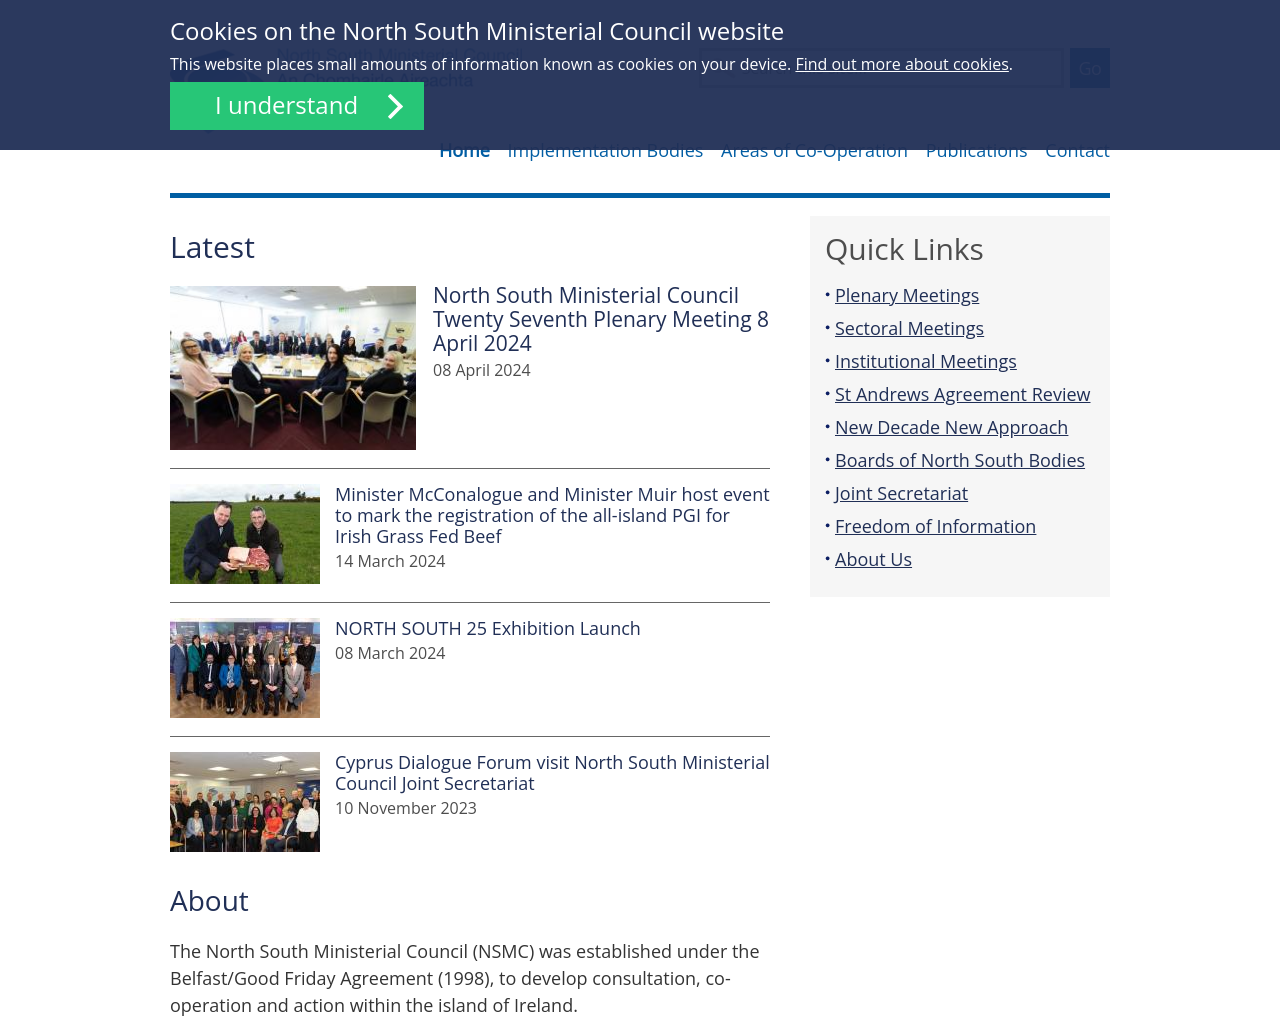 The North South Ministerial Council